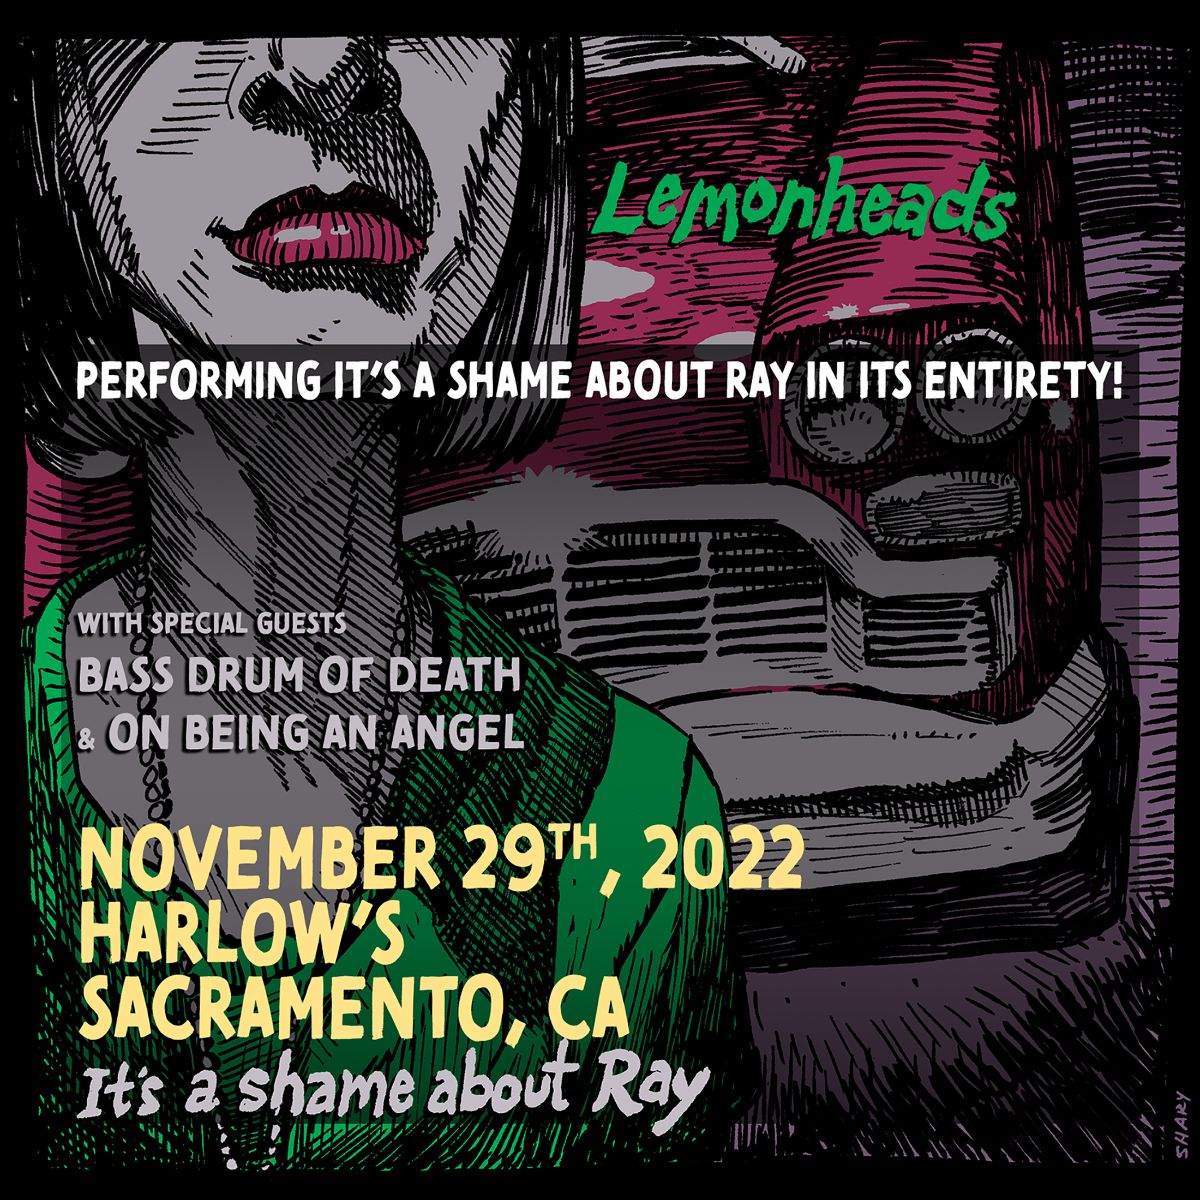 THE LEMONHEADS “IT’S A SHAME ABOUT RAY” 30TH ANNIVERSARY @ Harlows